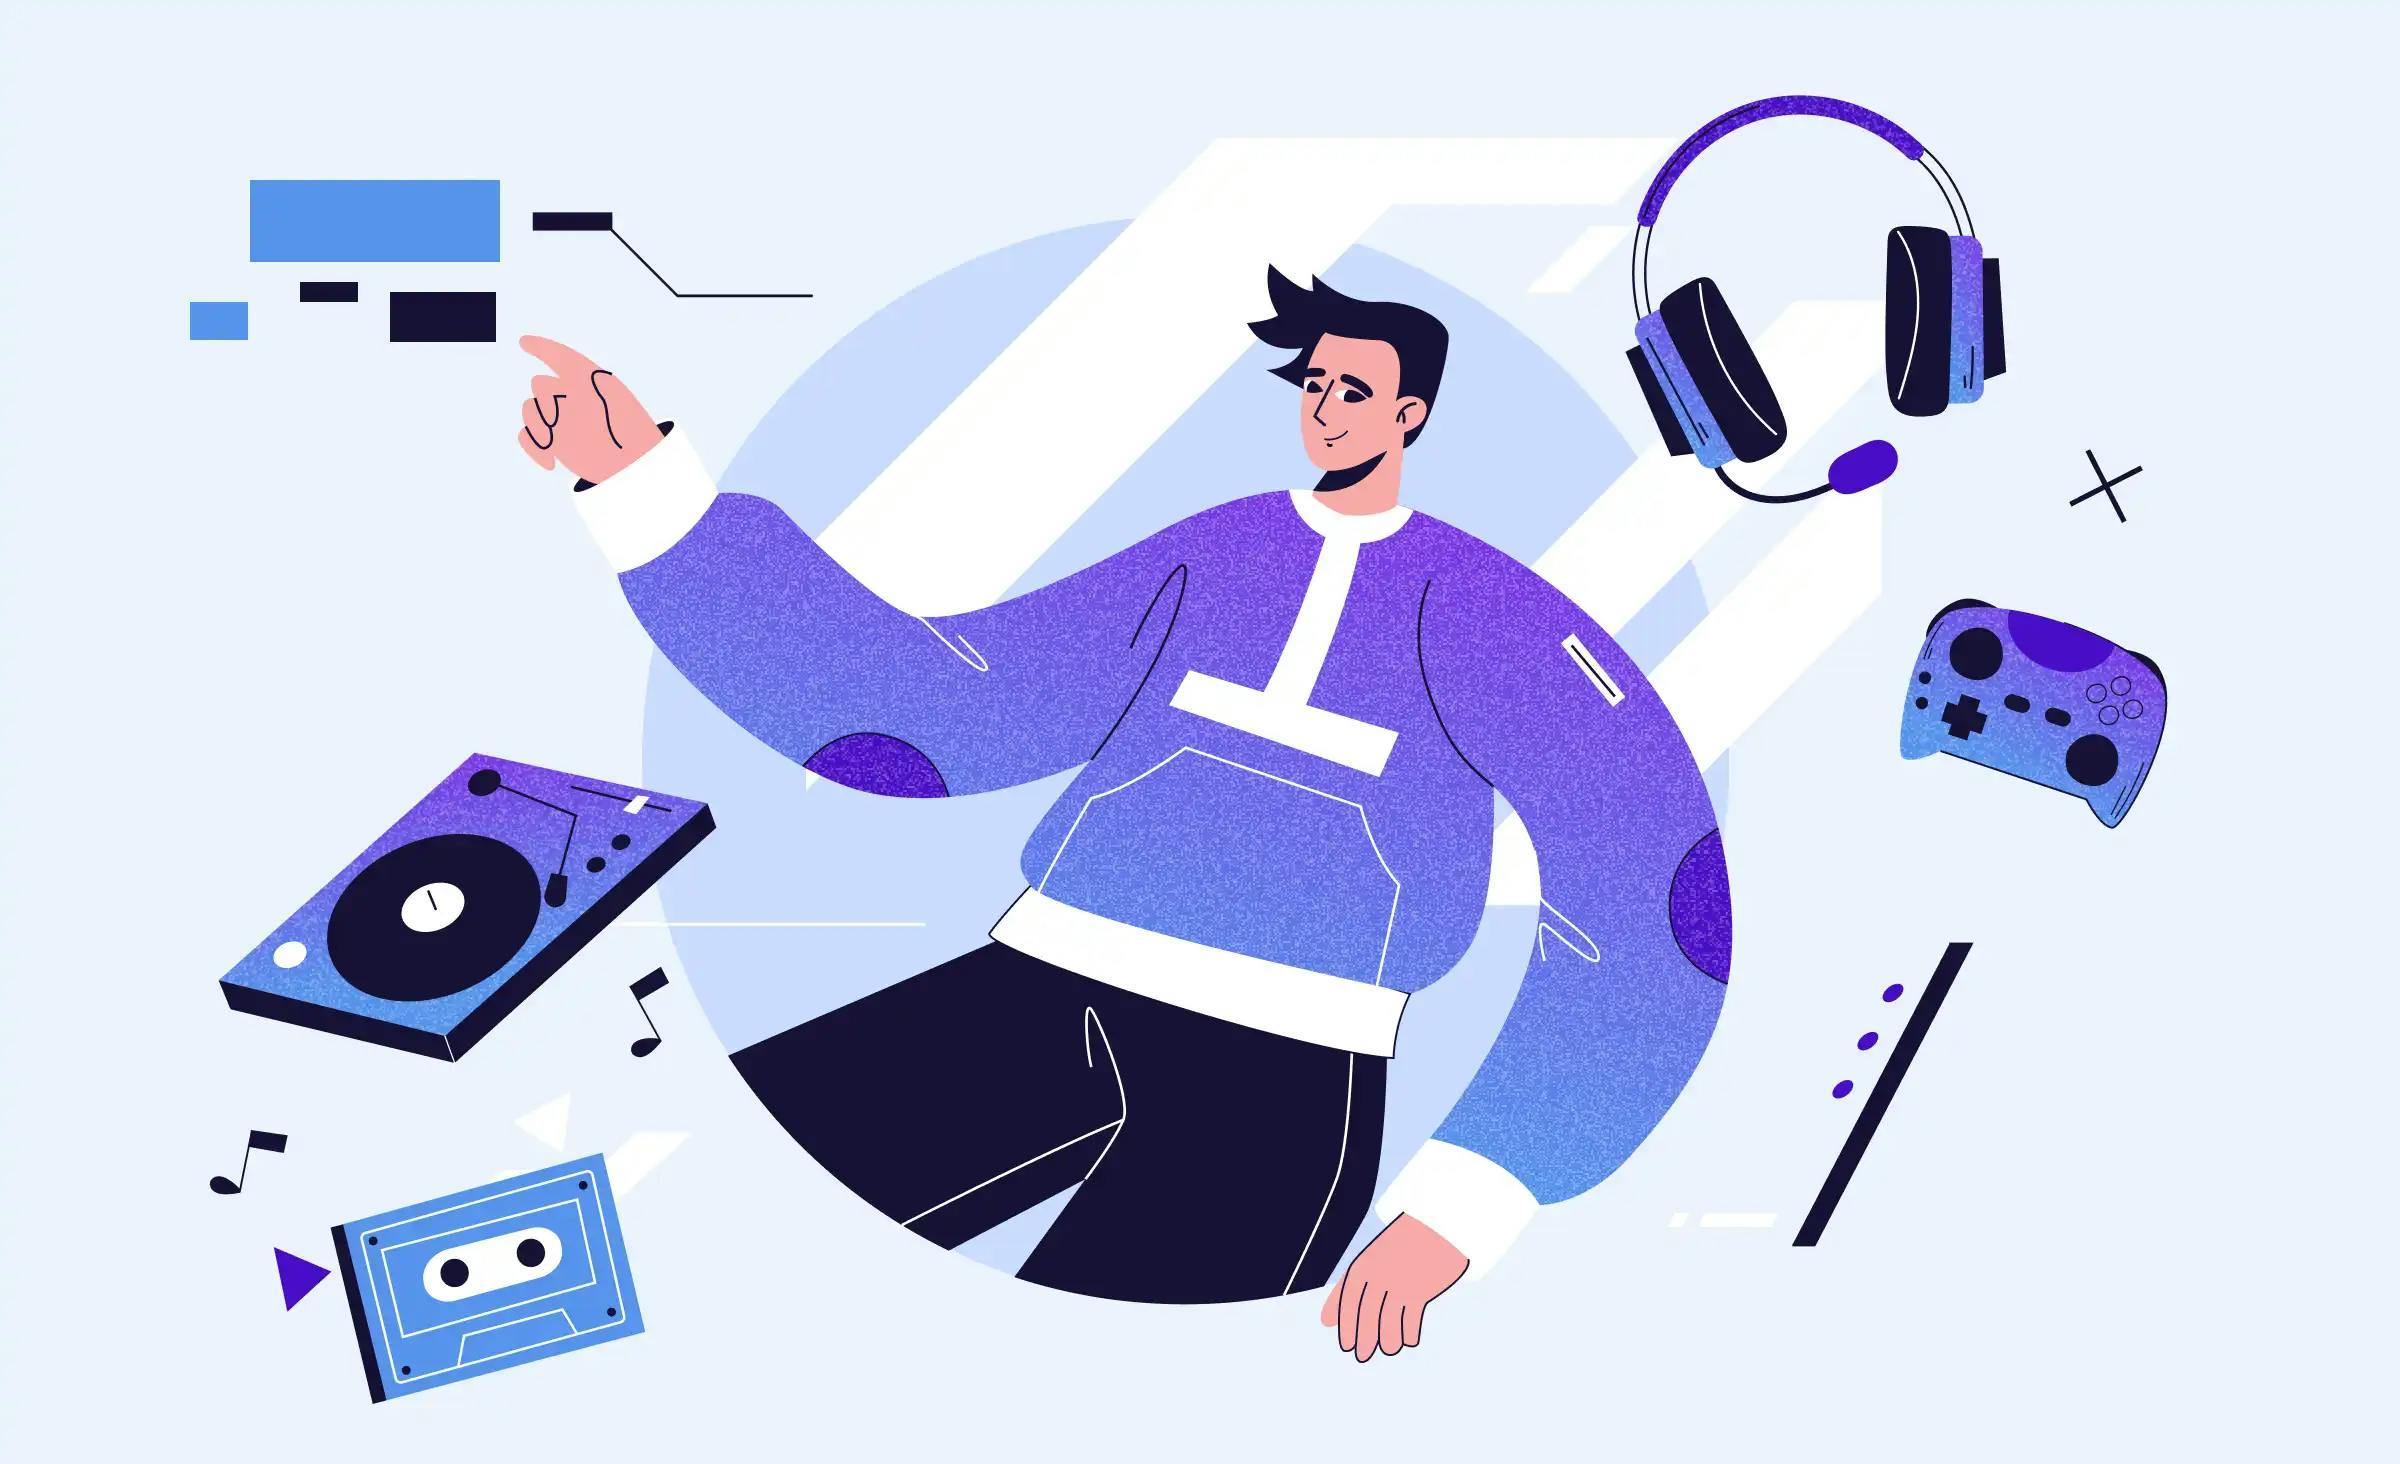 The cover depicts the article content dedicated to media and entertainment software development. In the picture, we see a young man pointing to the interface elements. Various items surround him, including headphones, a flute, a gaming controller, a phonograph, and a cassette.